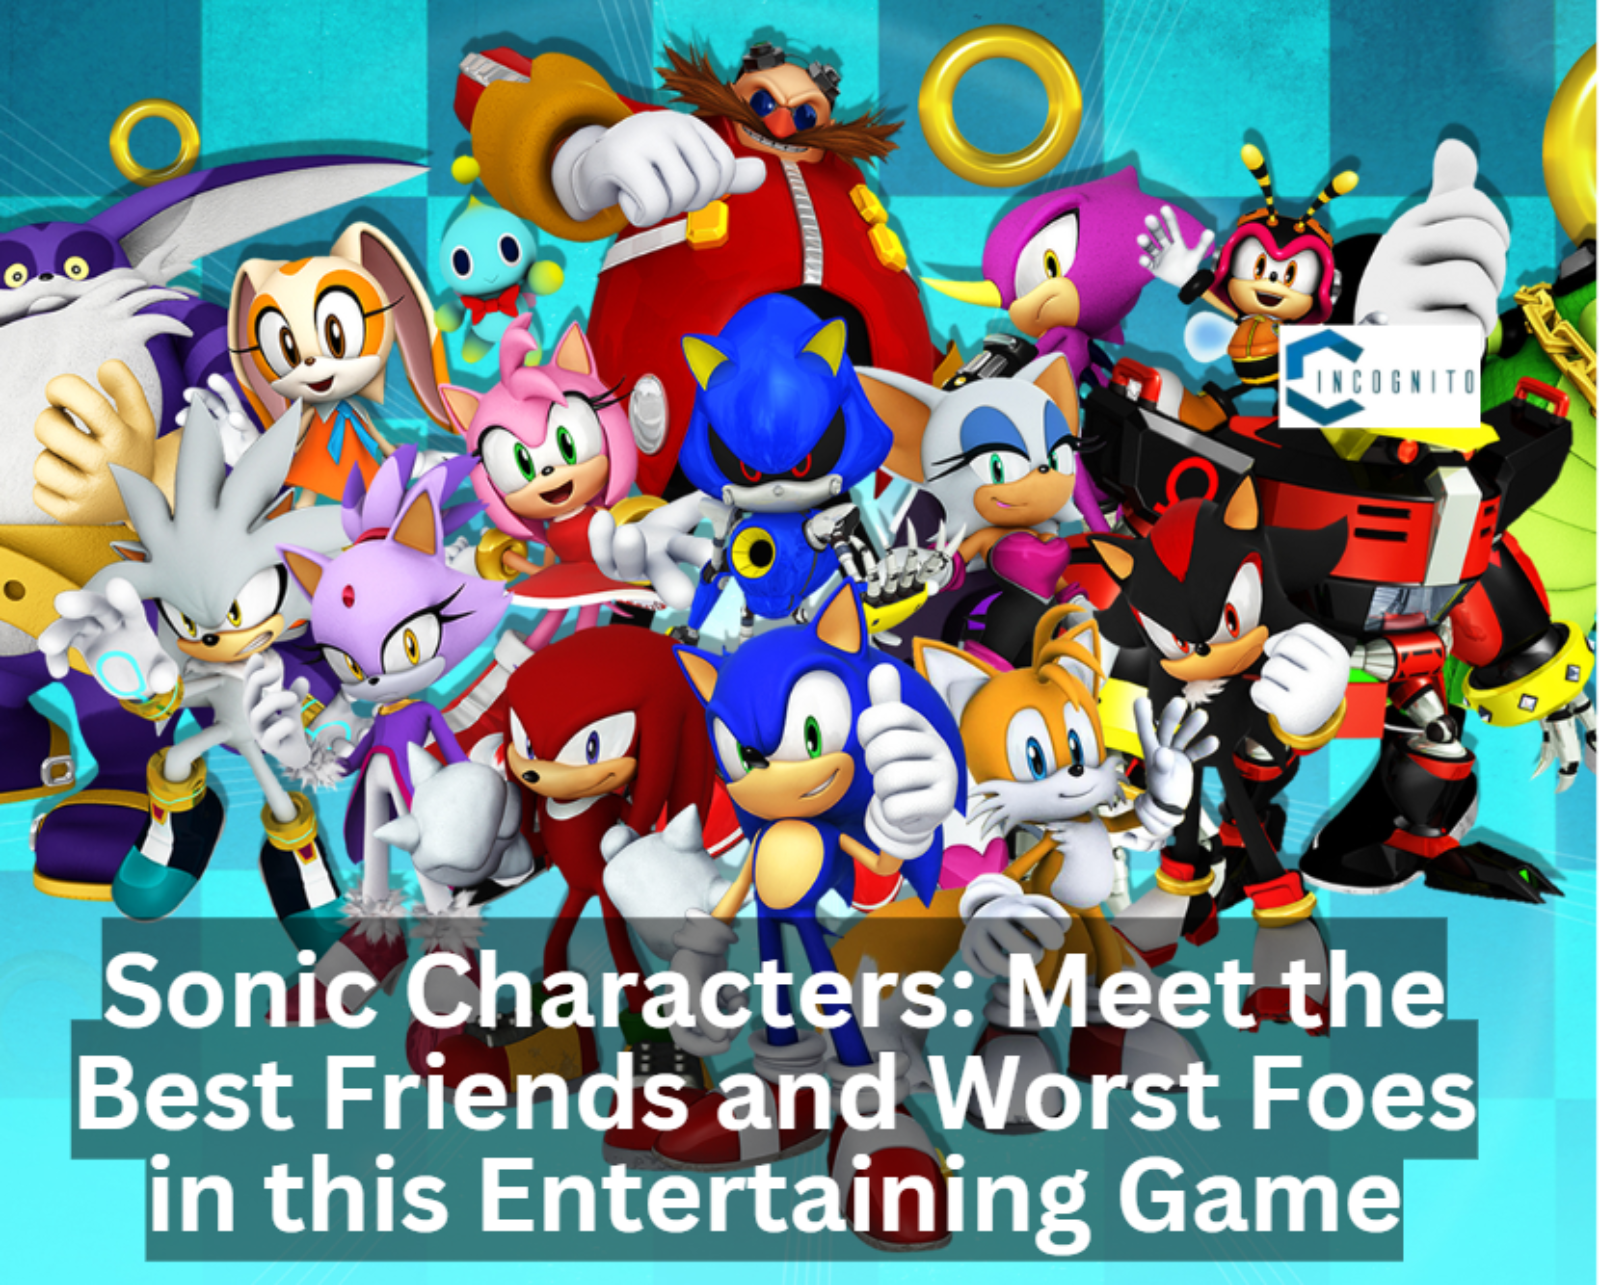 Sonic Characters: Meet the Best Friends and Worst Foes in this Entertaining Game